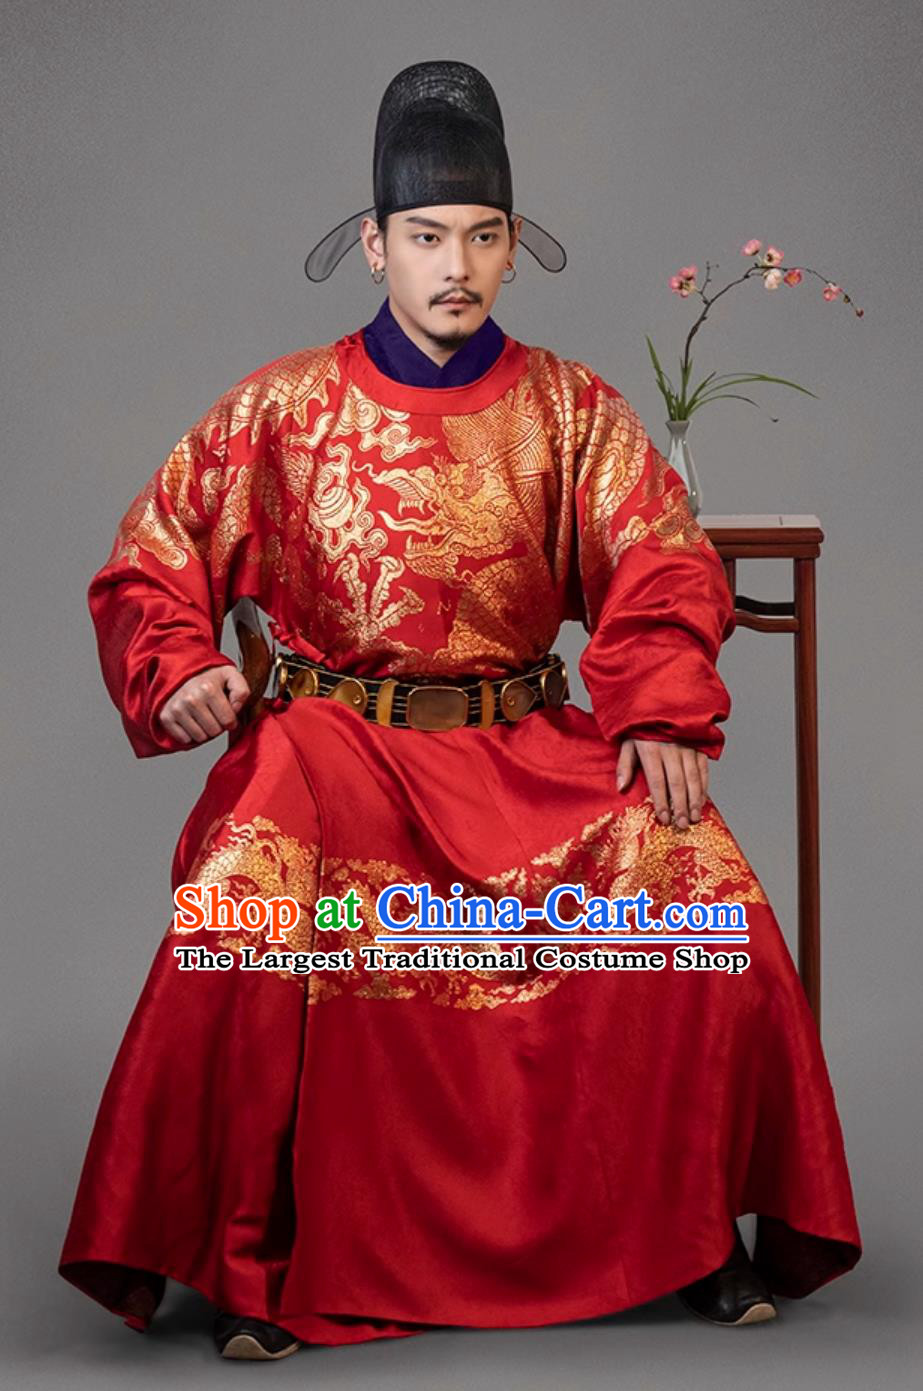 Online Shop Red Traditional Hanfu Ming Dynasty Official Clothing Ancient Chinese King of Kaiping Chang Yu Chun Costume